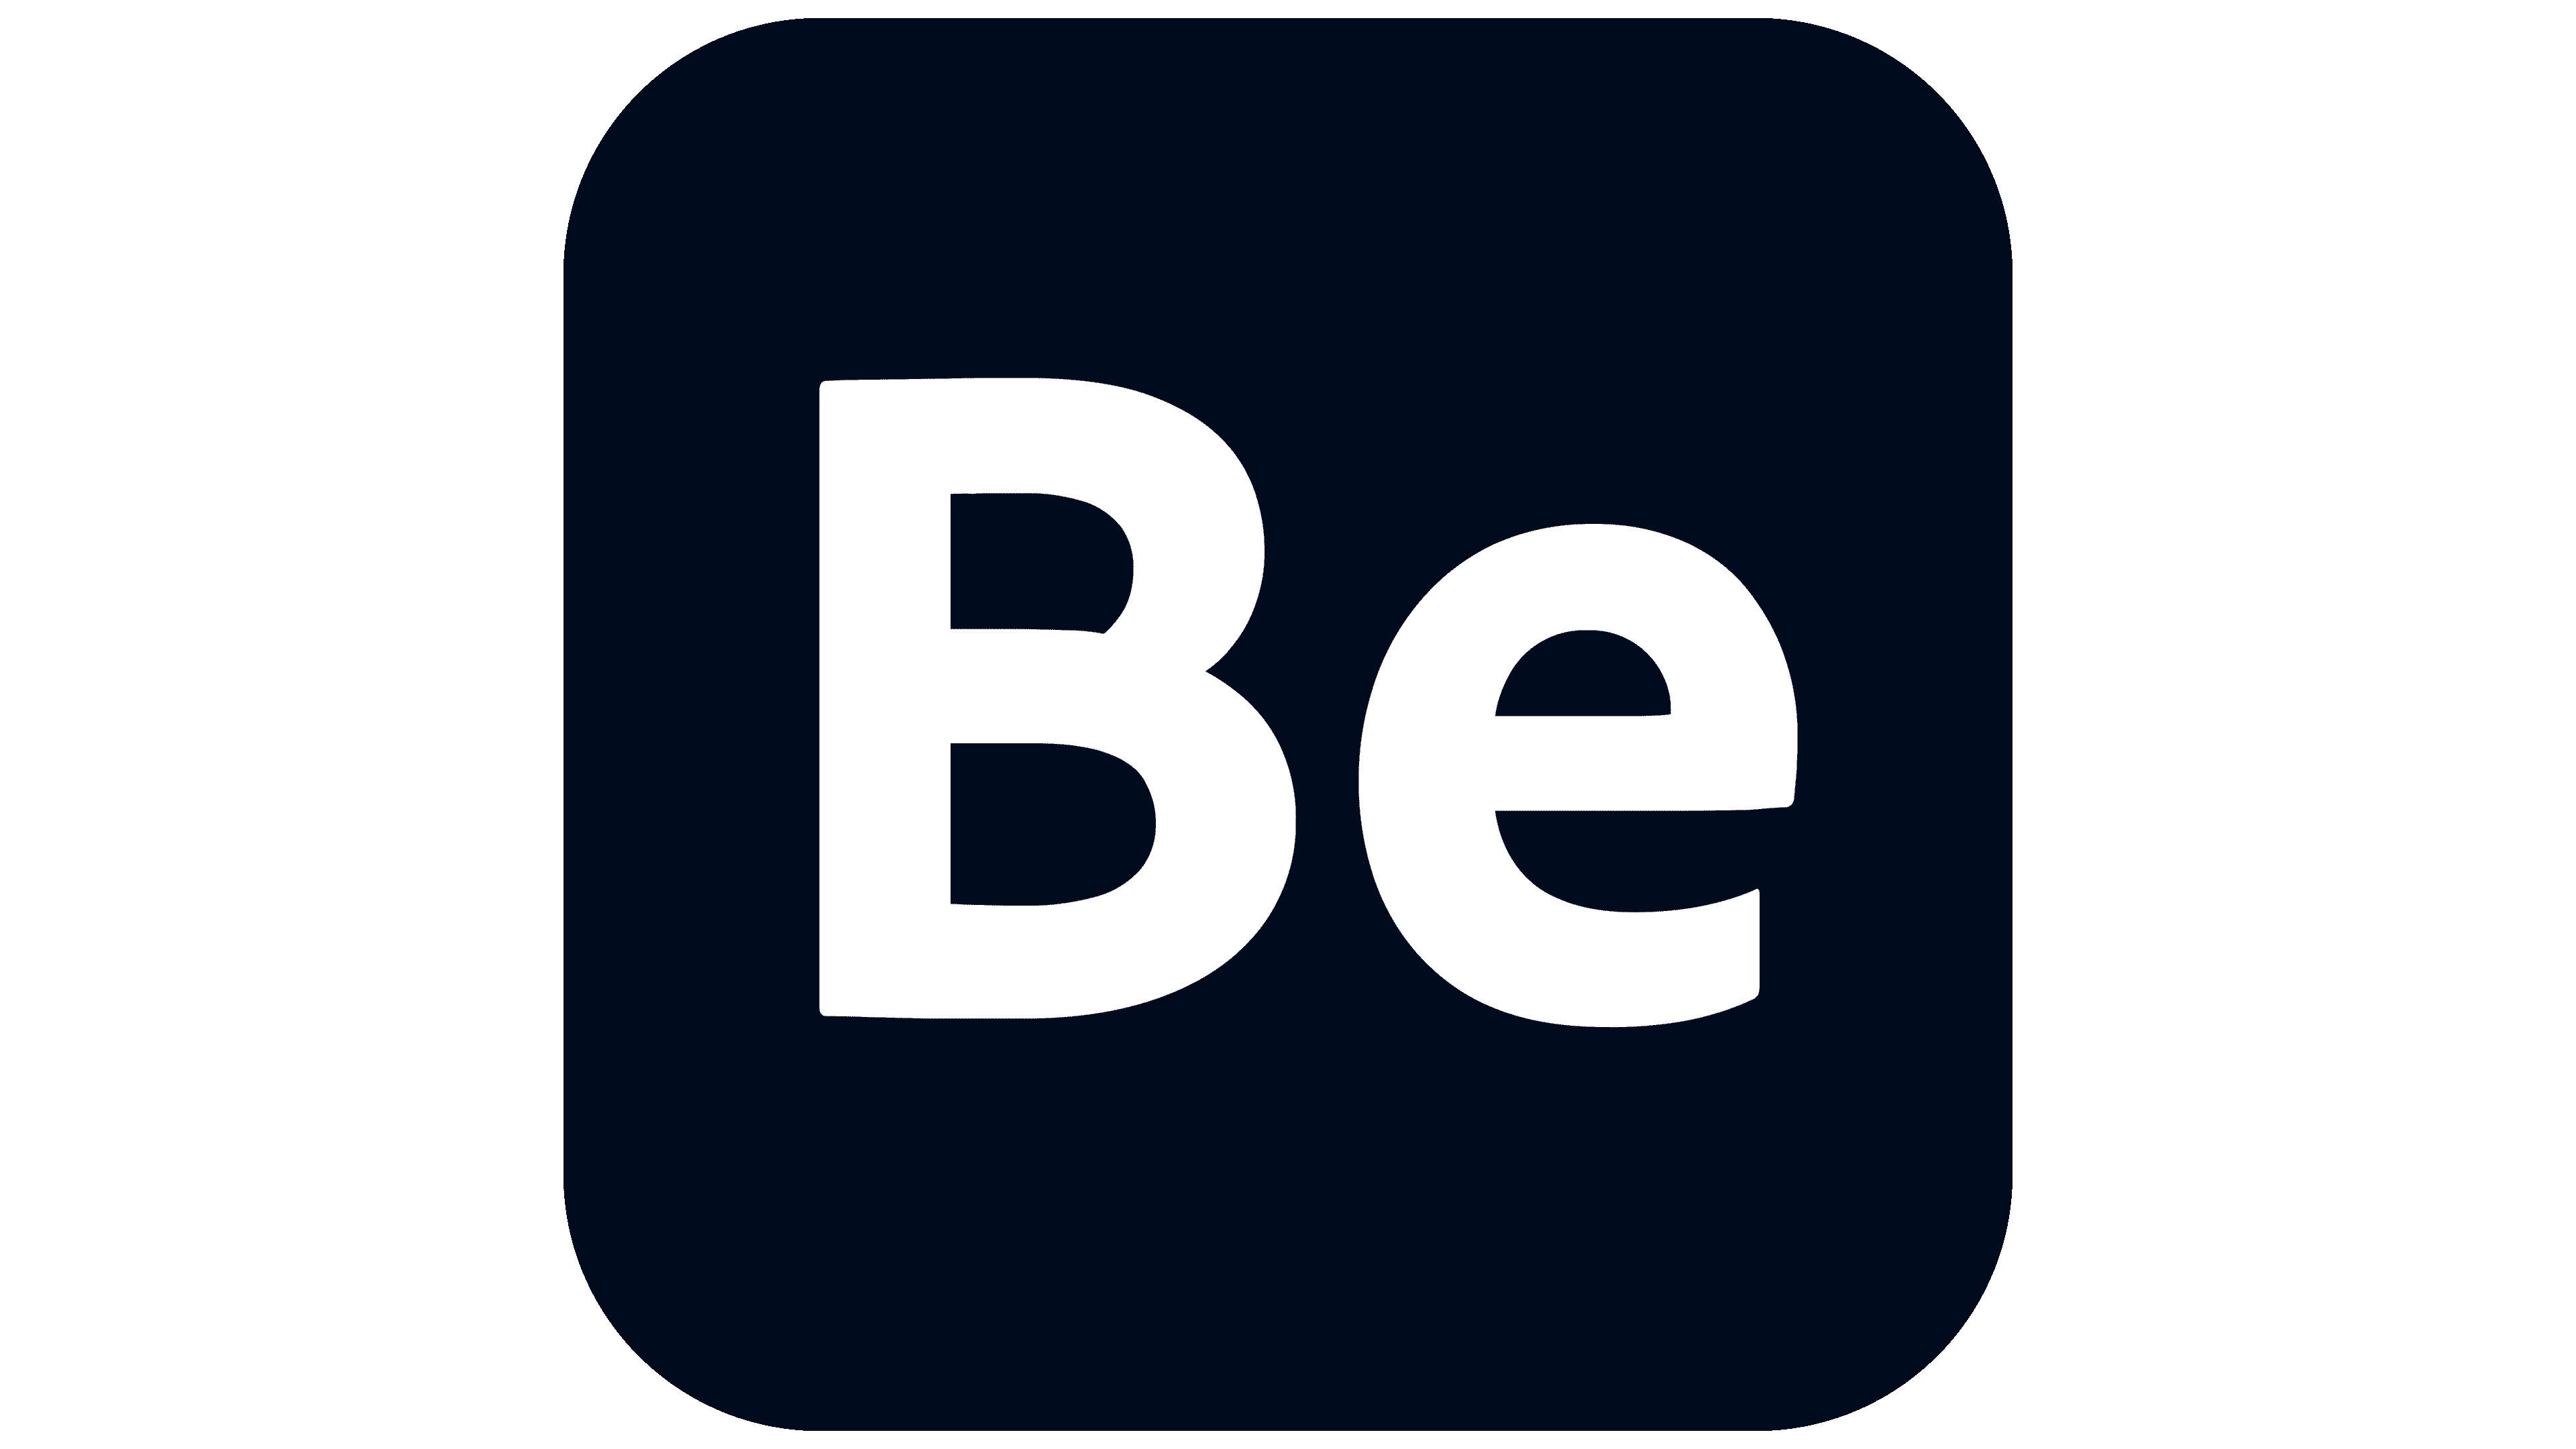 Behance Logo, symbol, meaning, history, PNG, brand